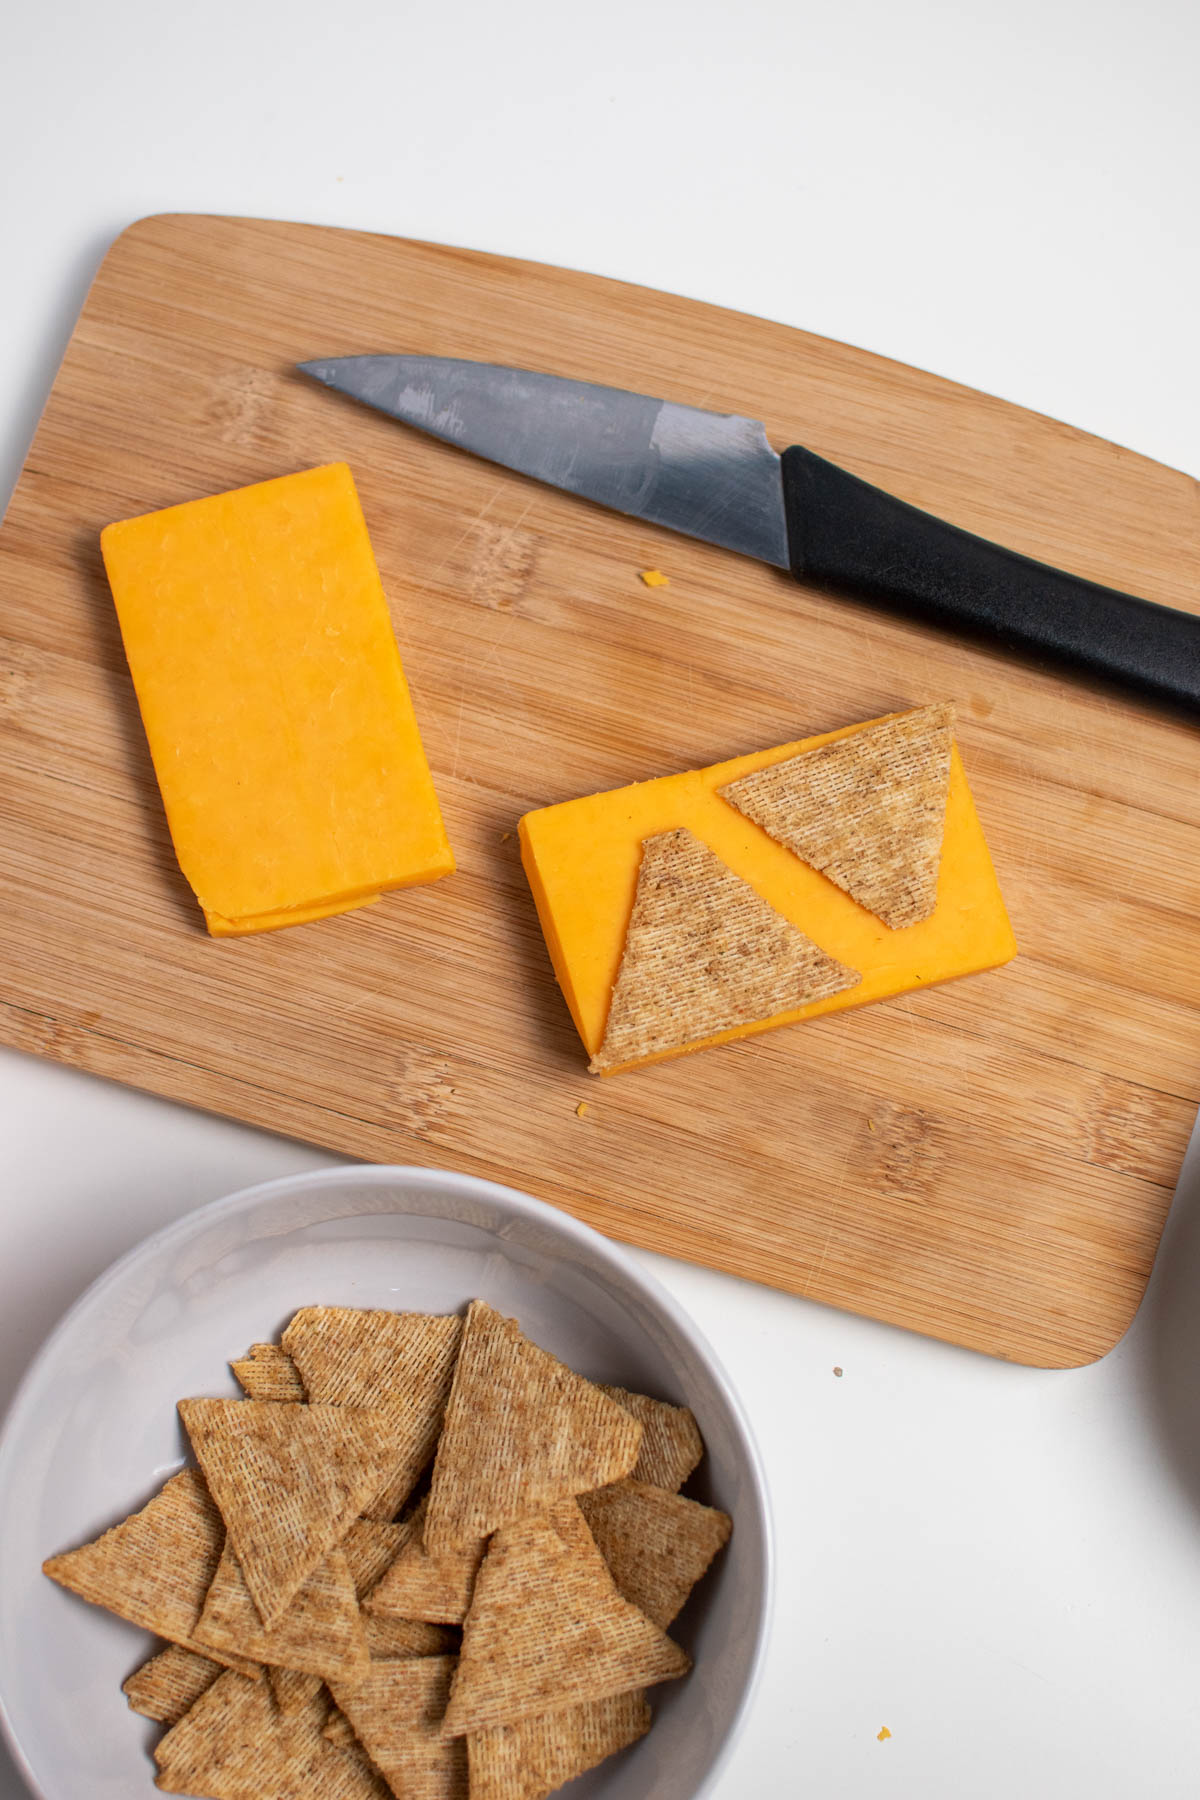 Two Triscuit crackers on a rectangle of cheddar cheese all on wood cutting board.